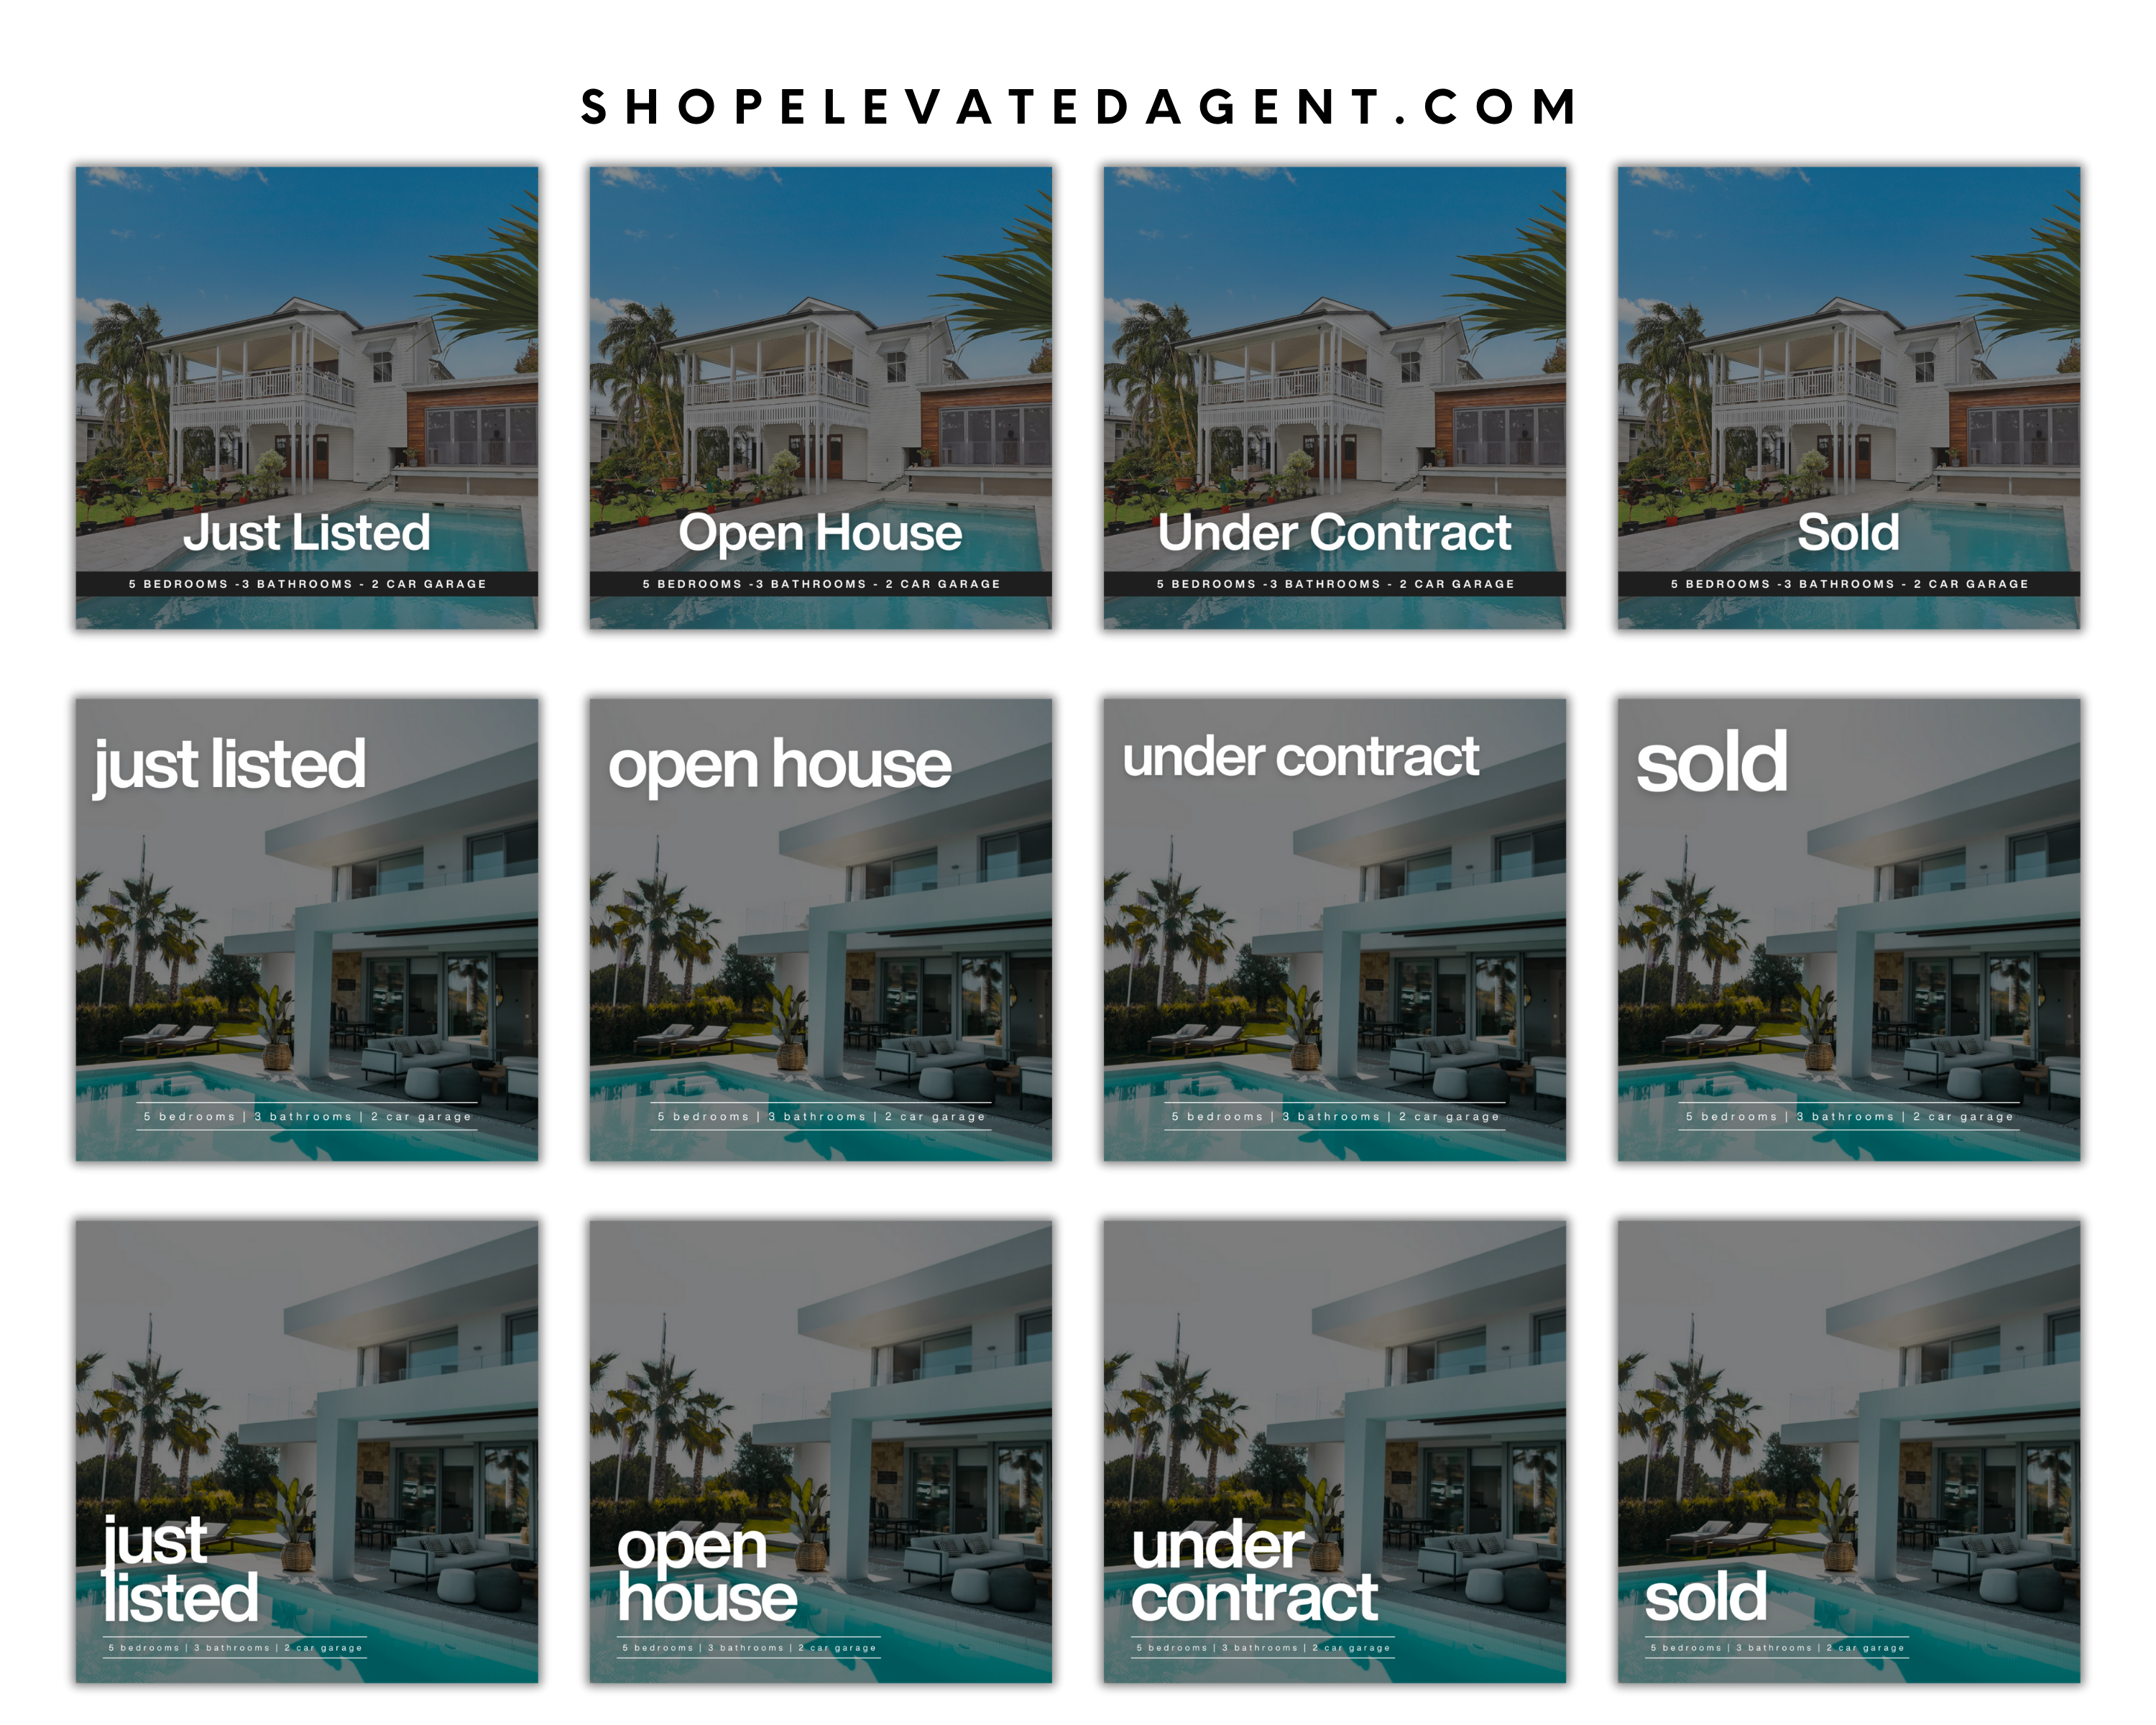 Real Estate Social Media Posts, Just Sold Posts, Under Contract Posts, Just Listed Posts, Open House Posts, Real Estate Marketing, Canva